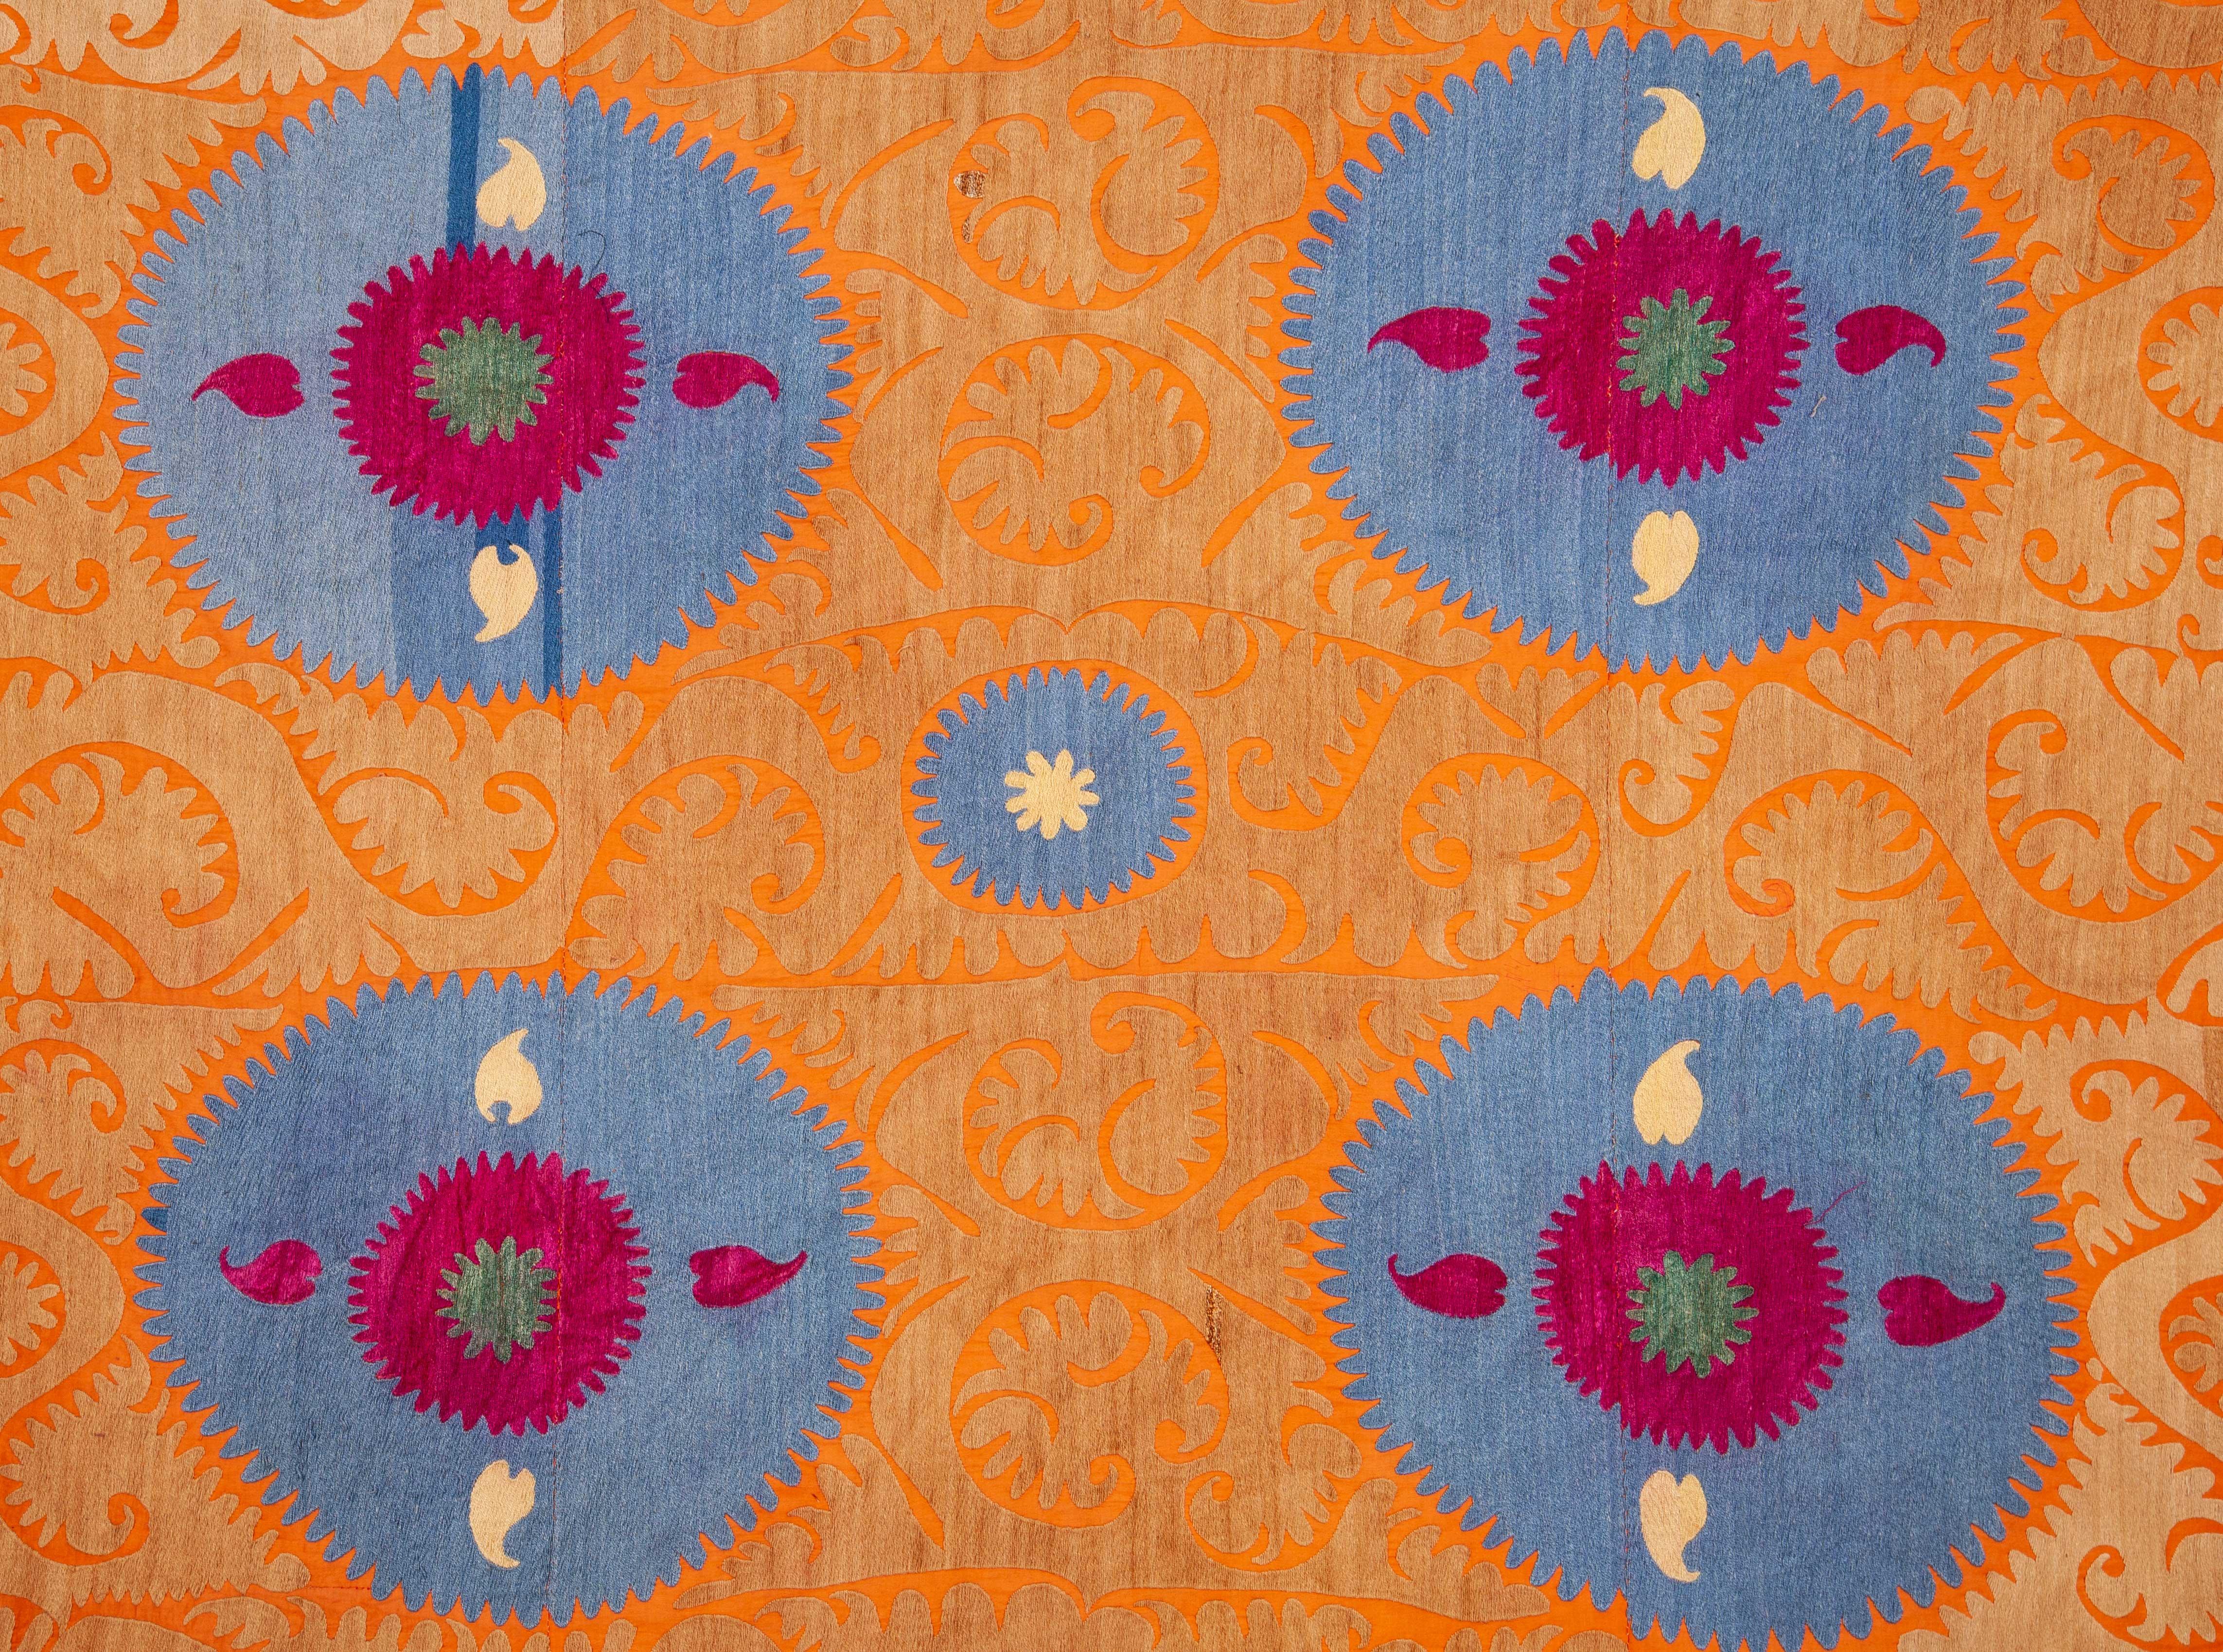 This is a mid-20th century cotton embroidered Suzani from Samarkand, Uzbekistan.